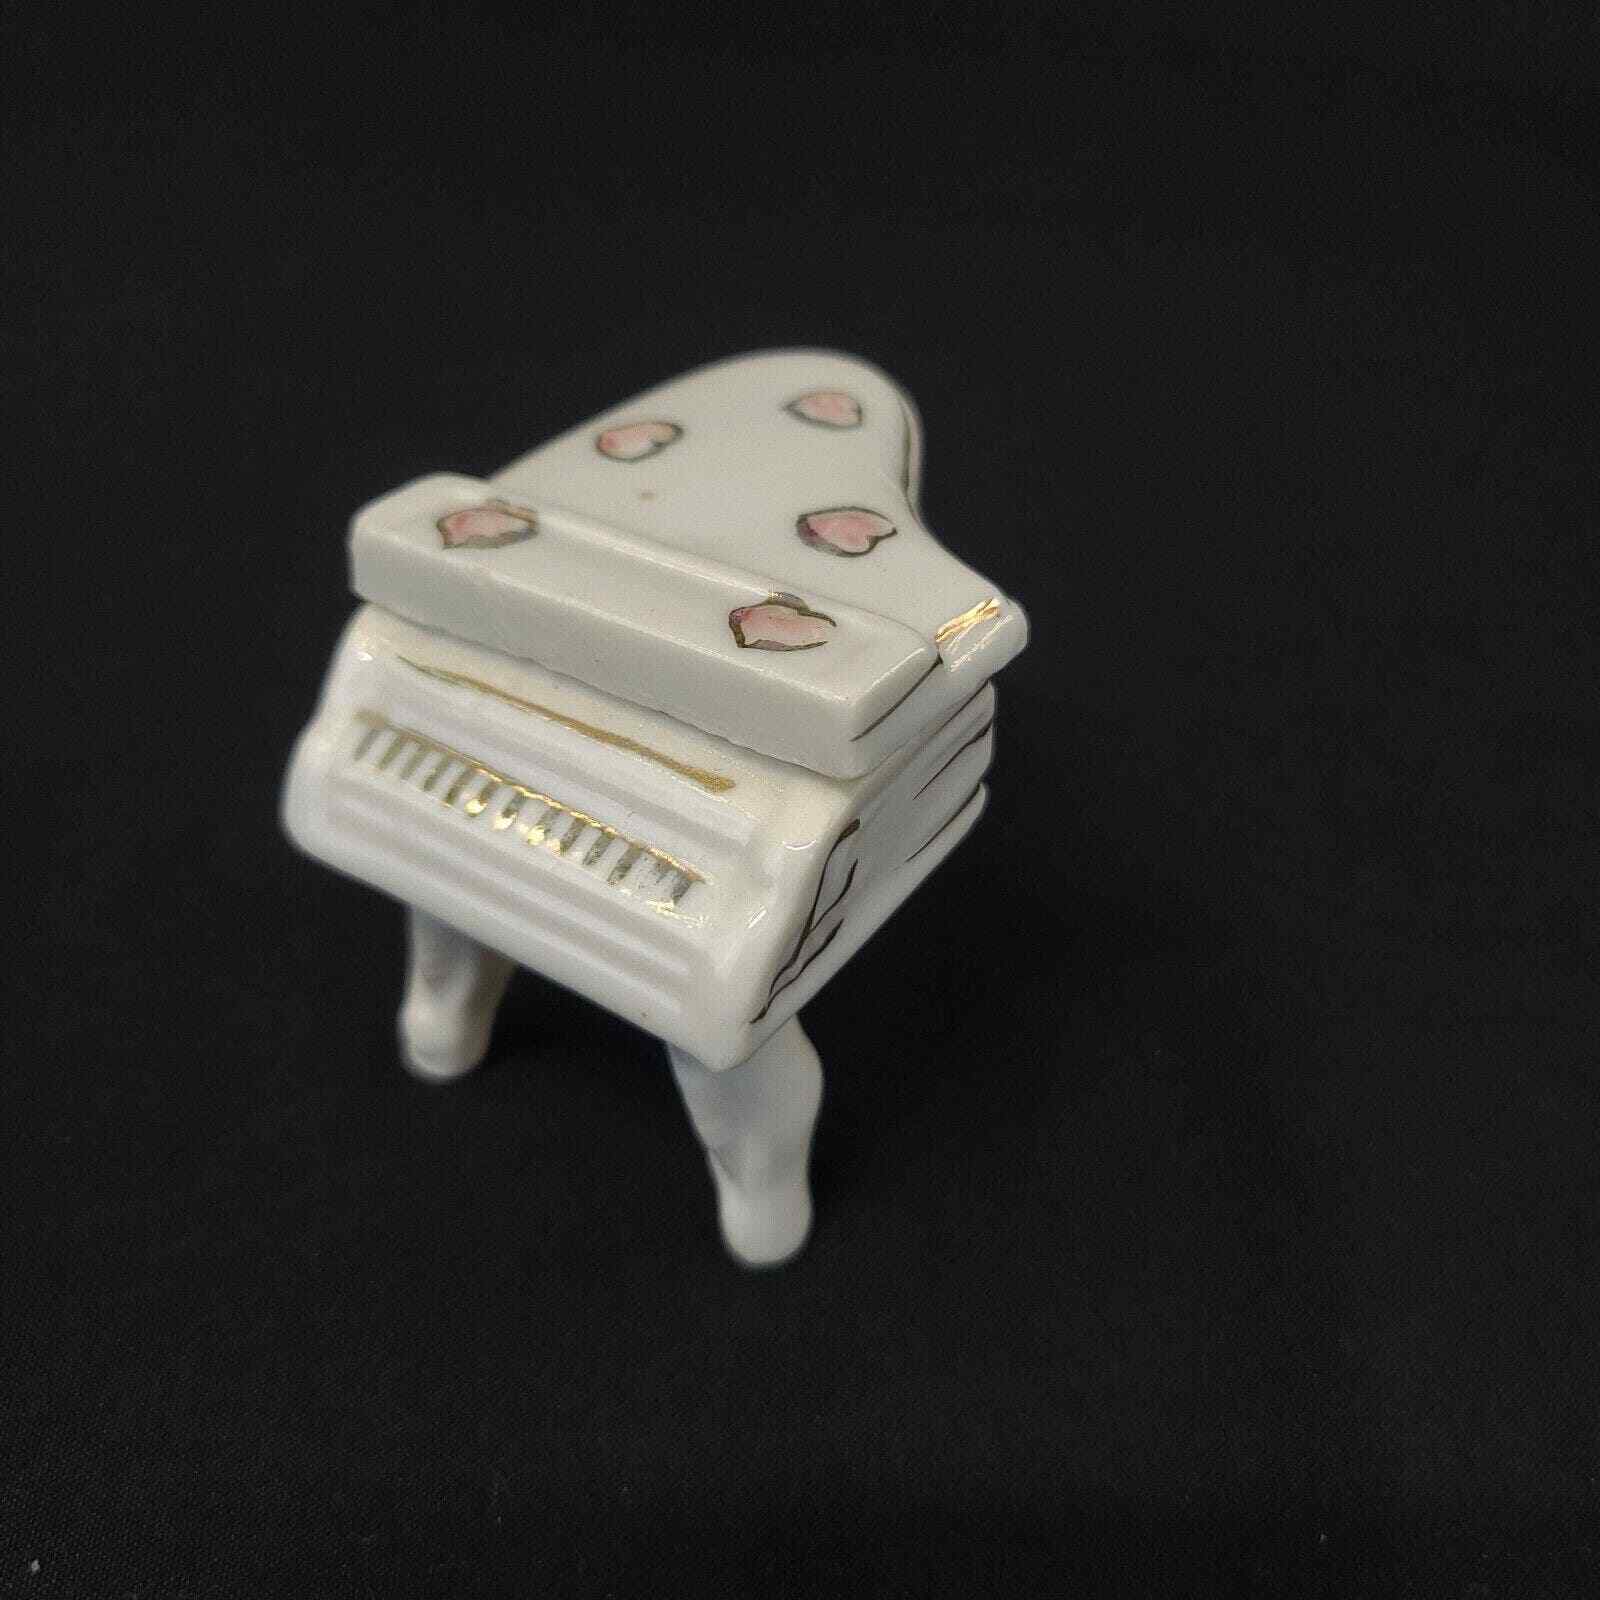 Vintage Hand-Painted Piano Trinket Box with Hearts and Trim - Collectible Decor